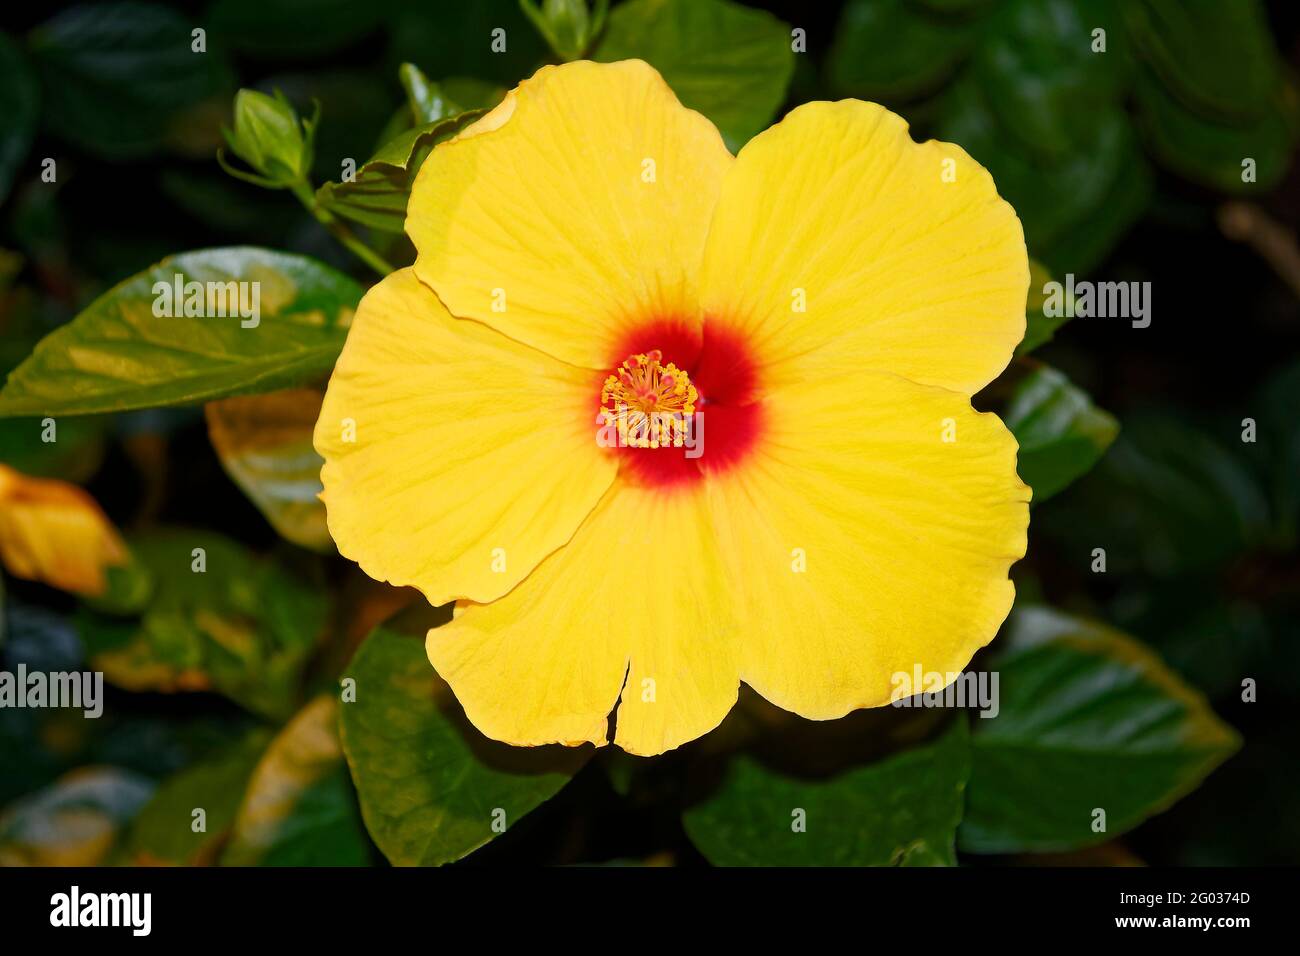 yellow hibiscus, cultivated flower, large, bright, close-up, nature, shrub, Malvaceae family Stock Photo